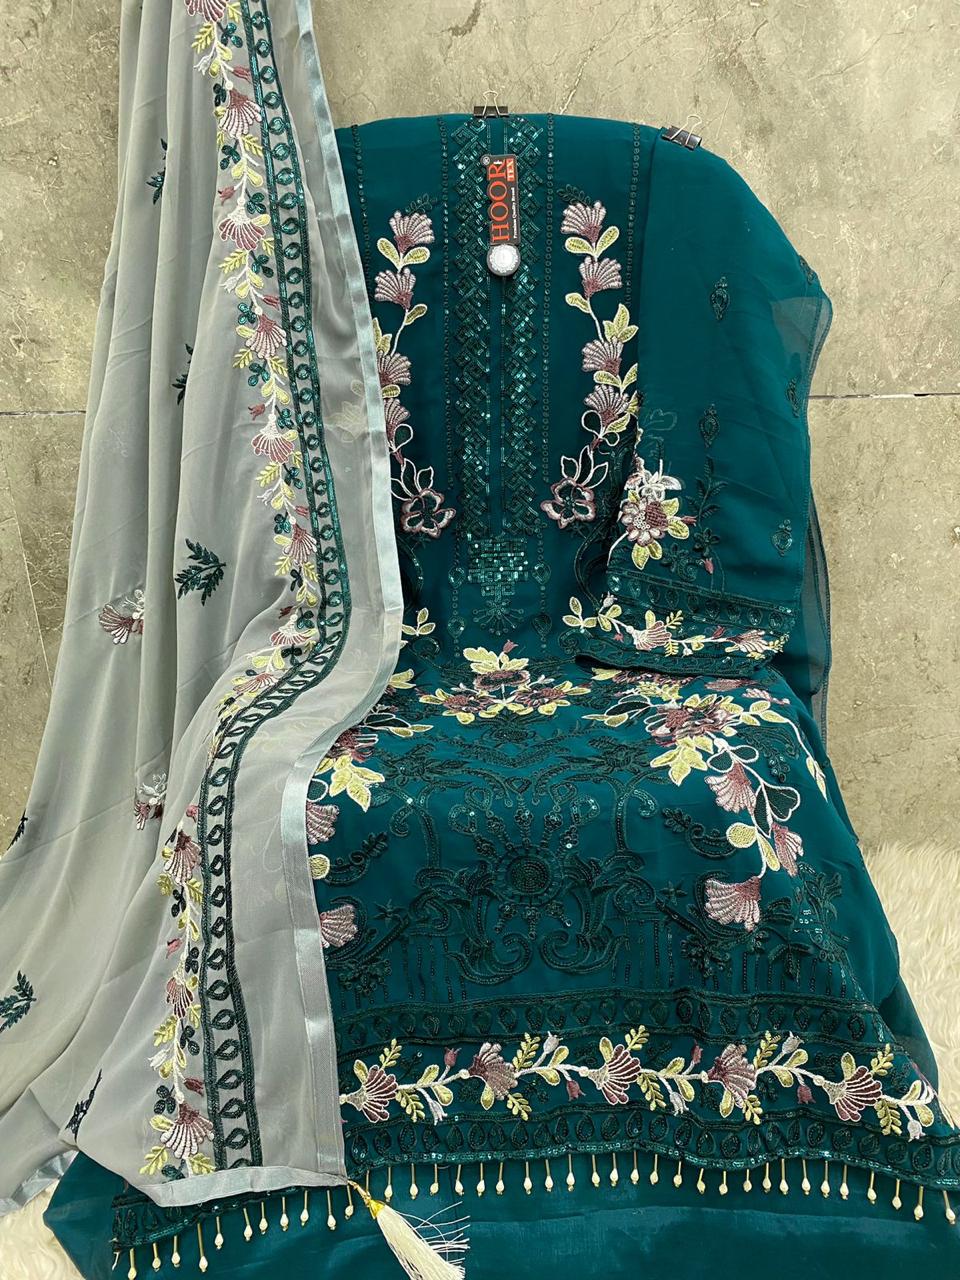 HOOR TEX H 252 A PAKISTANI SUITS IN INDIA